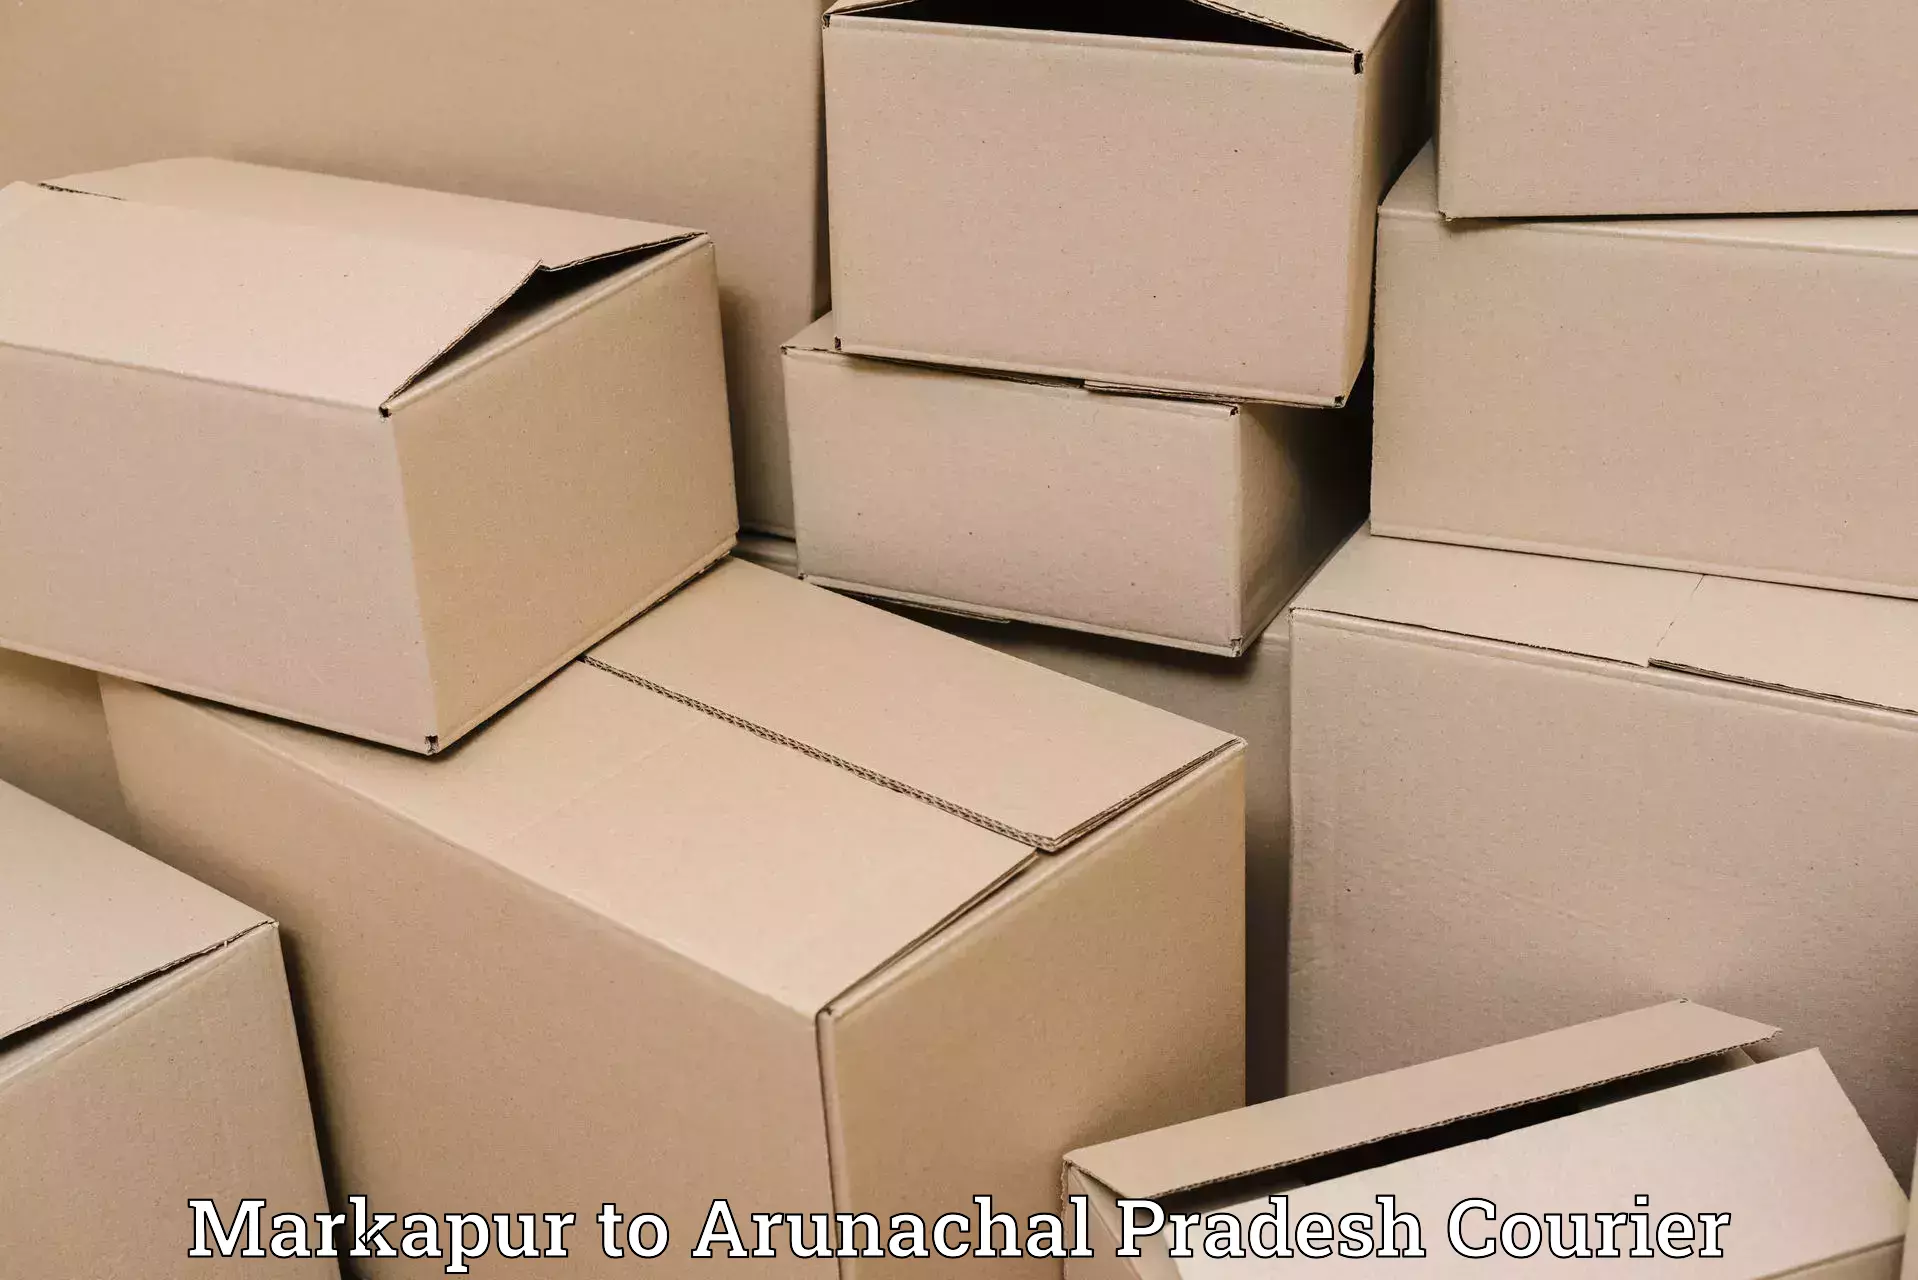 Reliable parcel services in Markapur to Khonsa